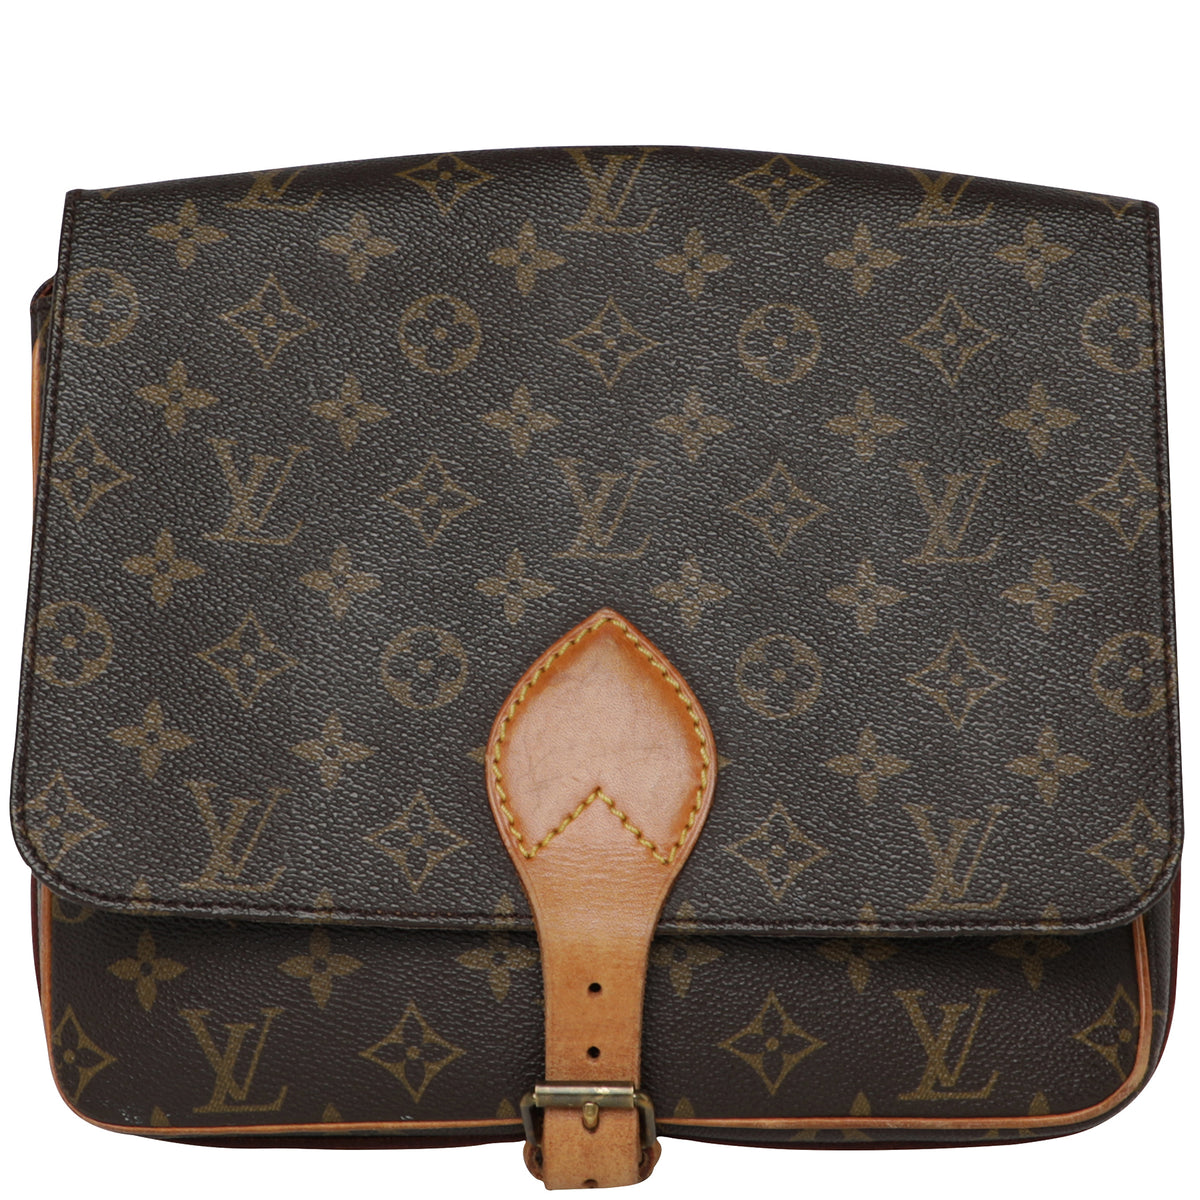 Louis Vuitton Cartouchiere GM - Available in store today